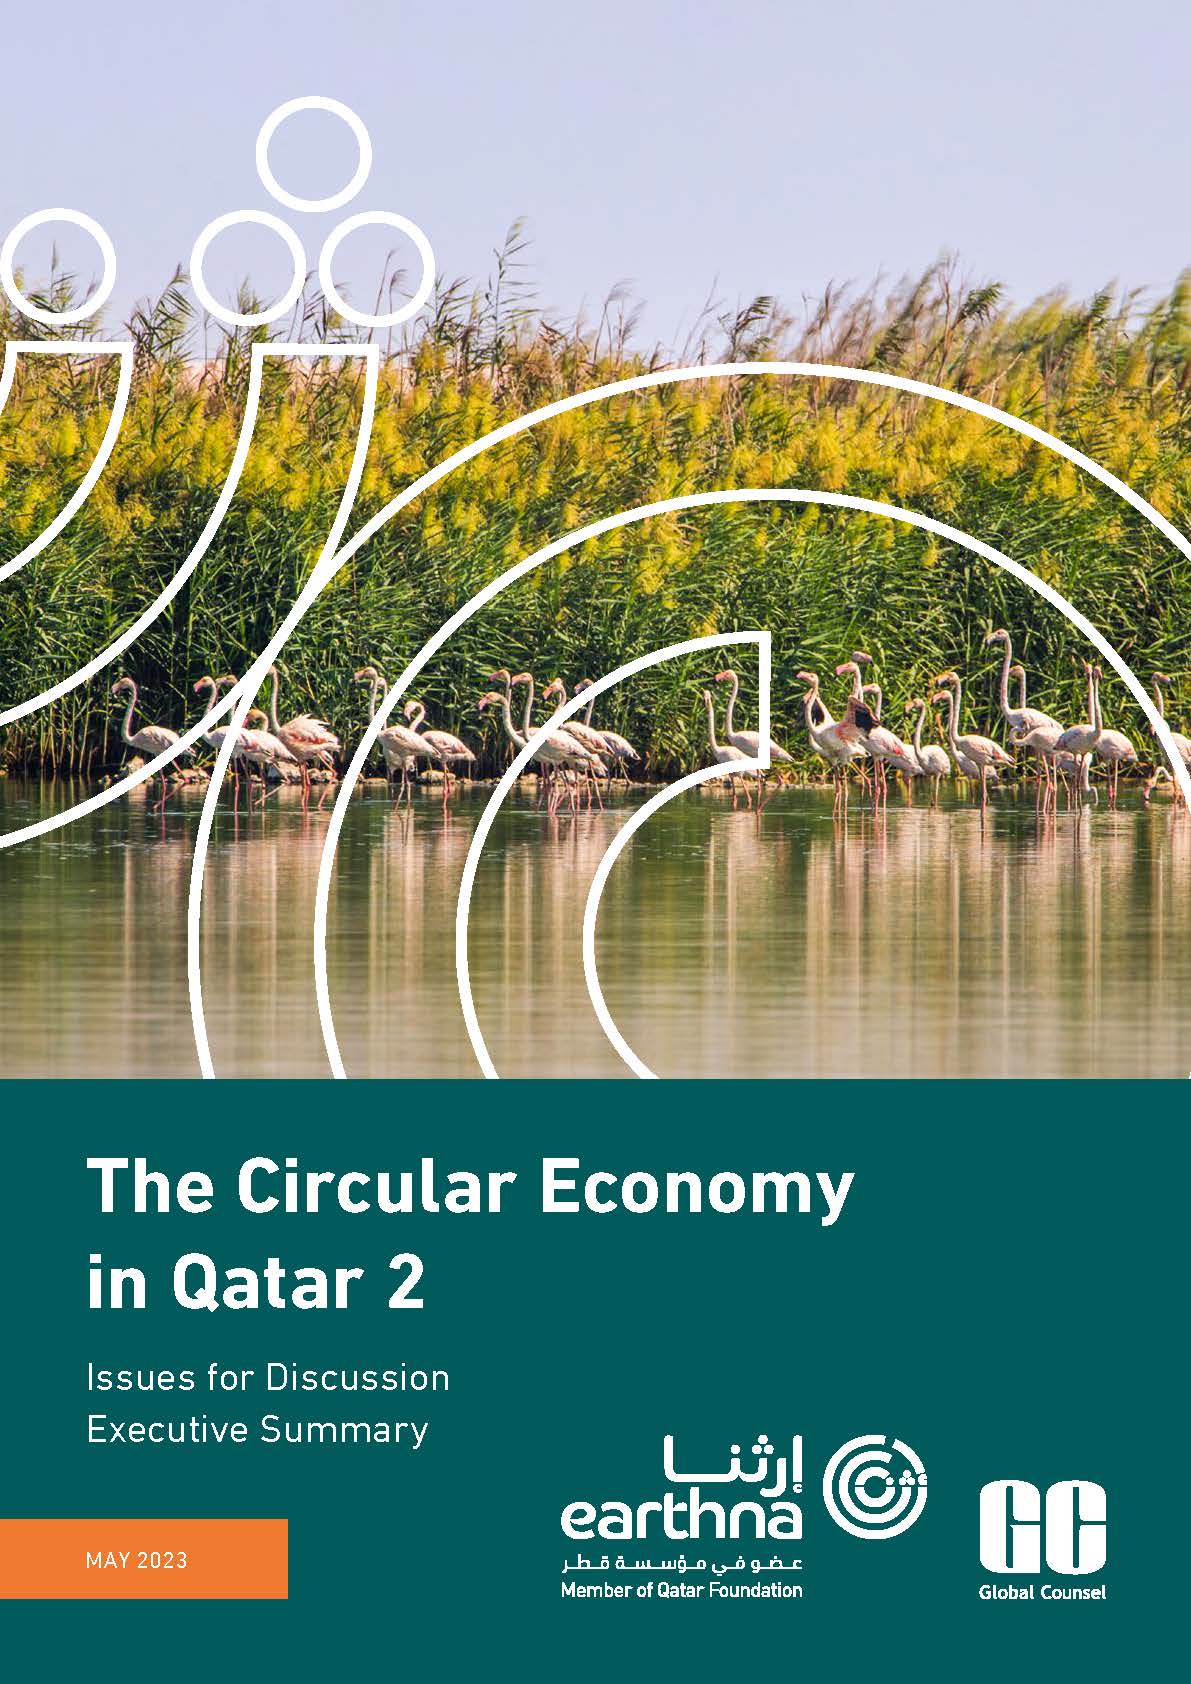 The Circular Economy  in Qatar 2, Issues for Discussion - Executive Summary